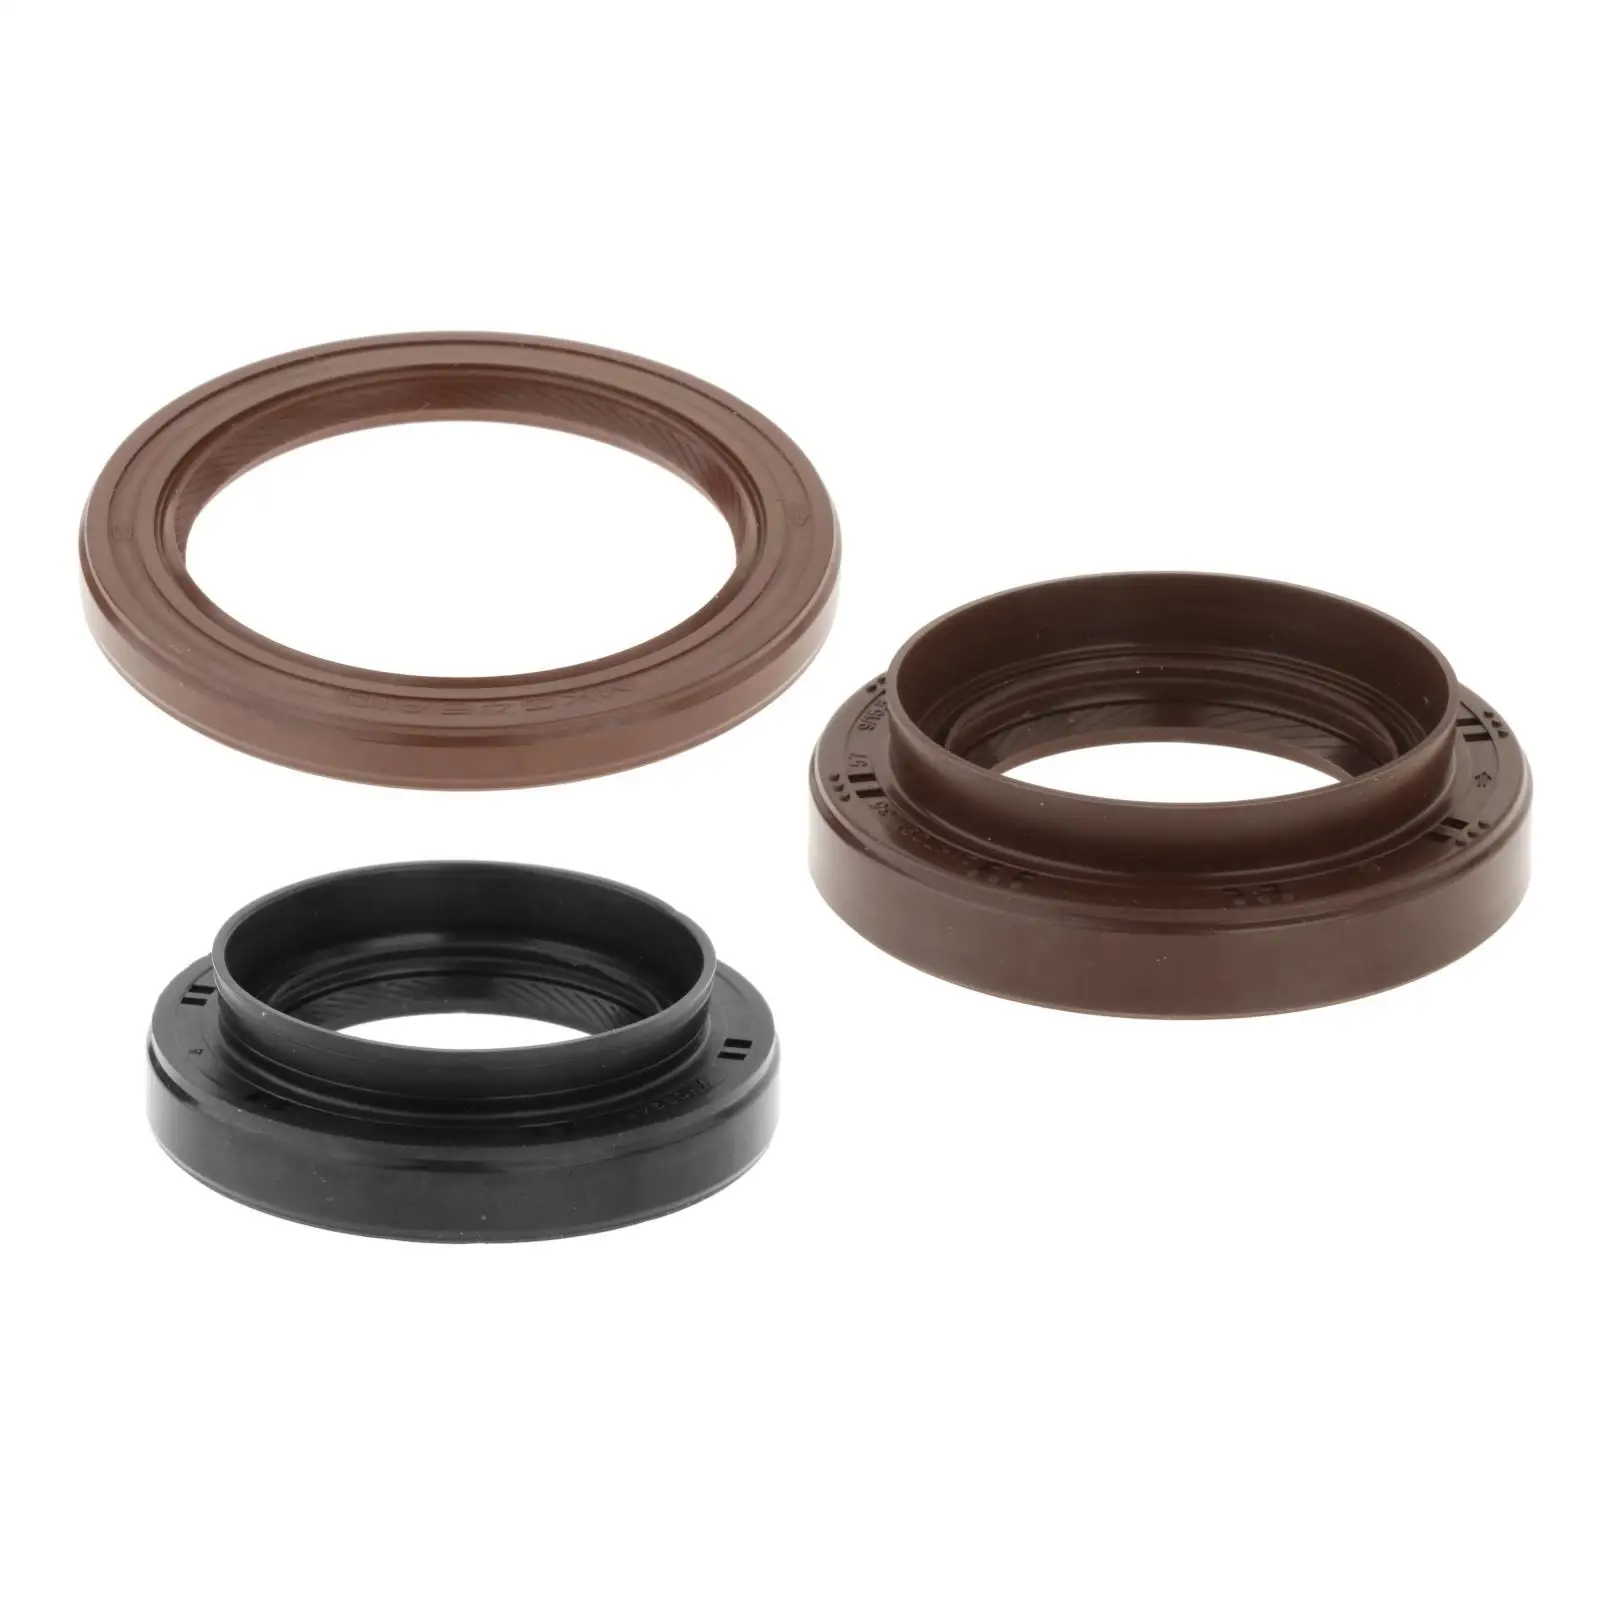 Transmission Oil Seal Moulding Accessories Supplies Front Fits for Toyota Vehicle Parts